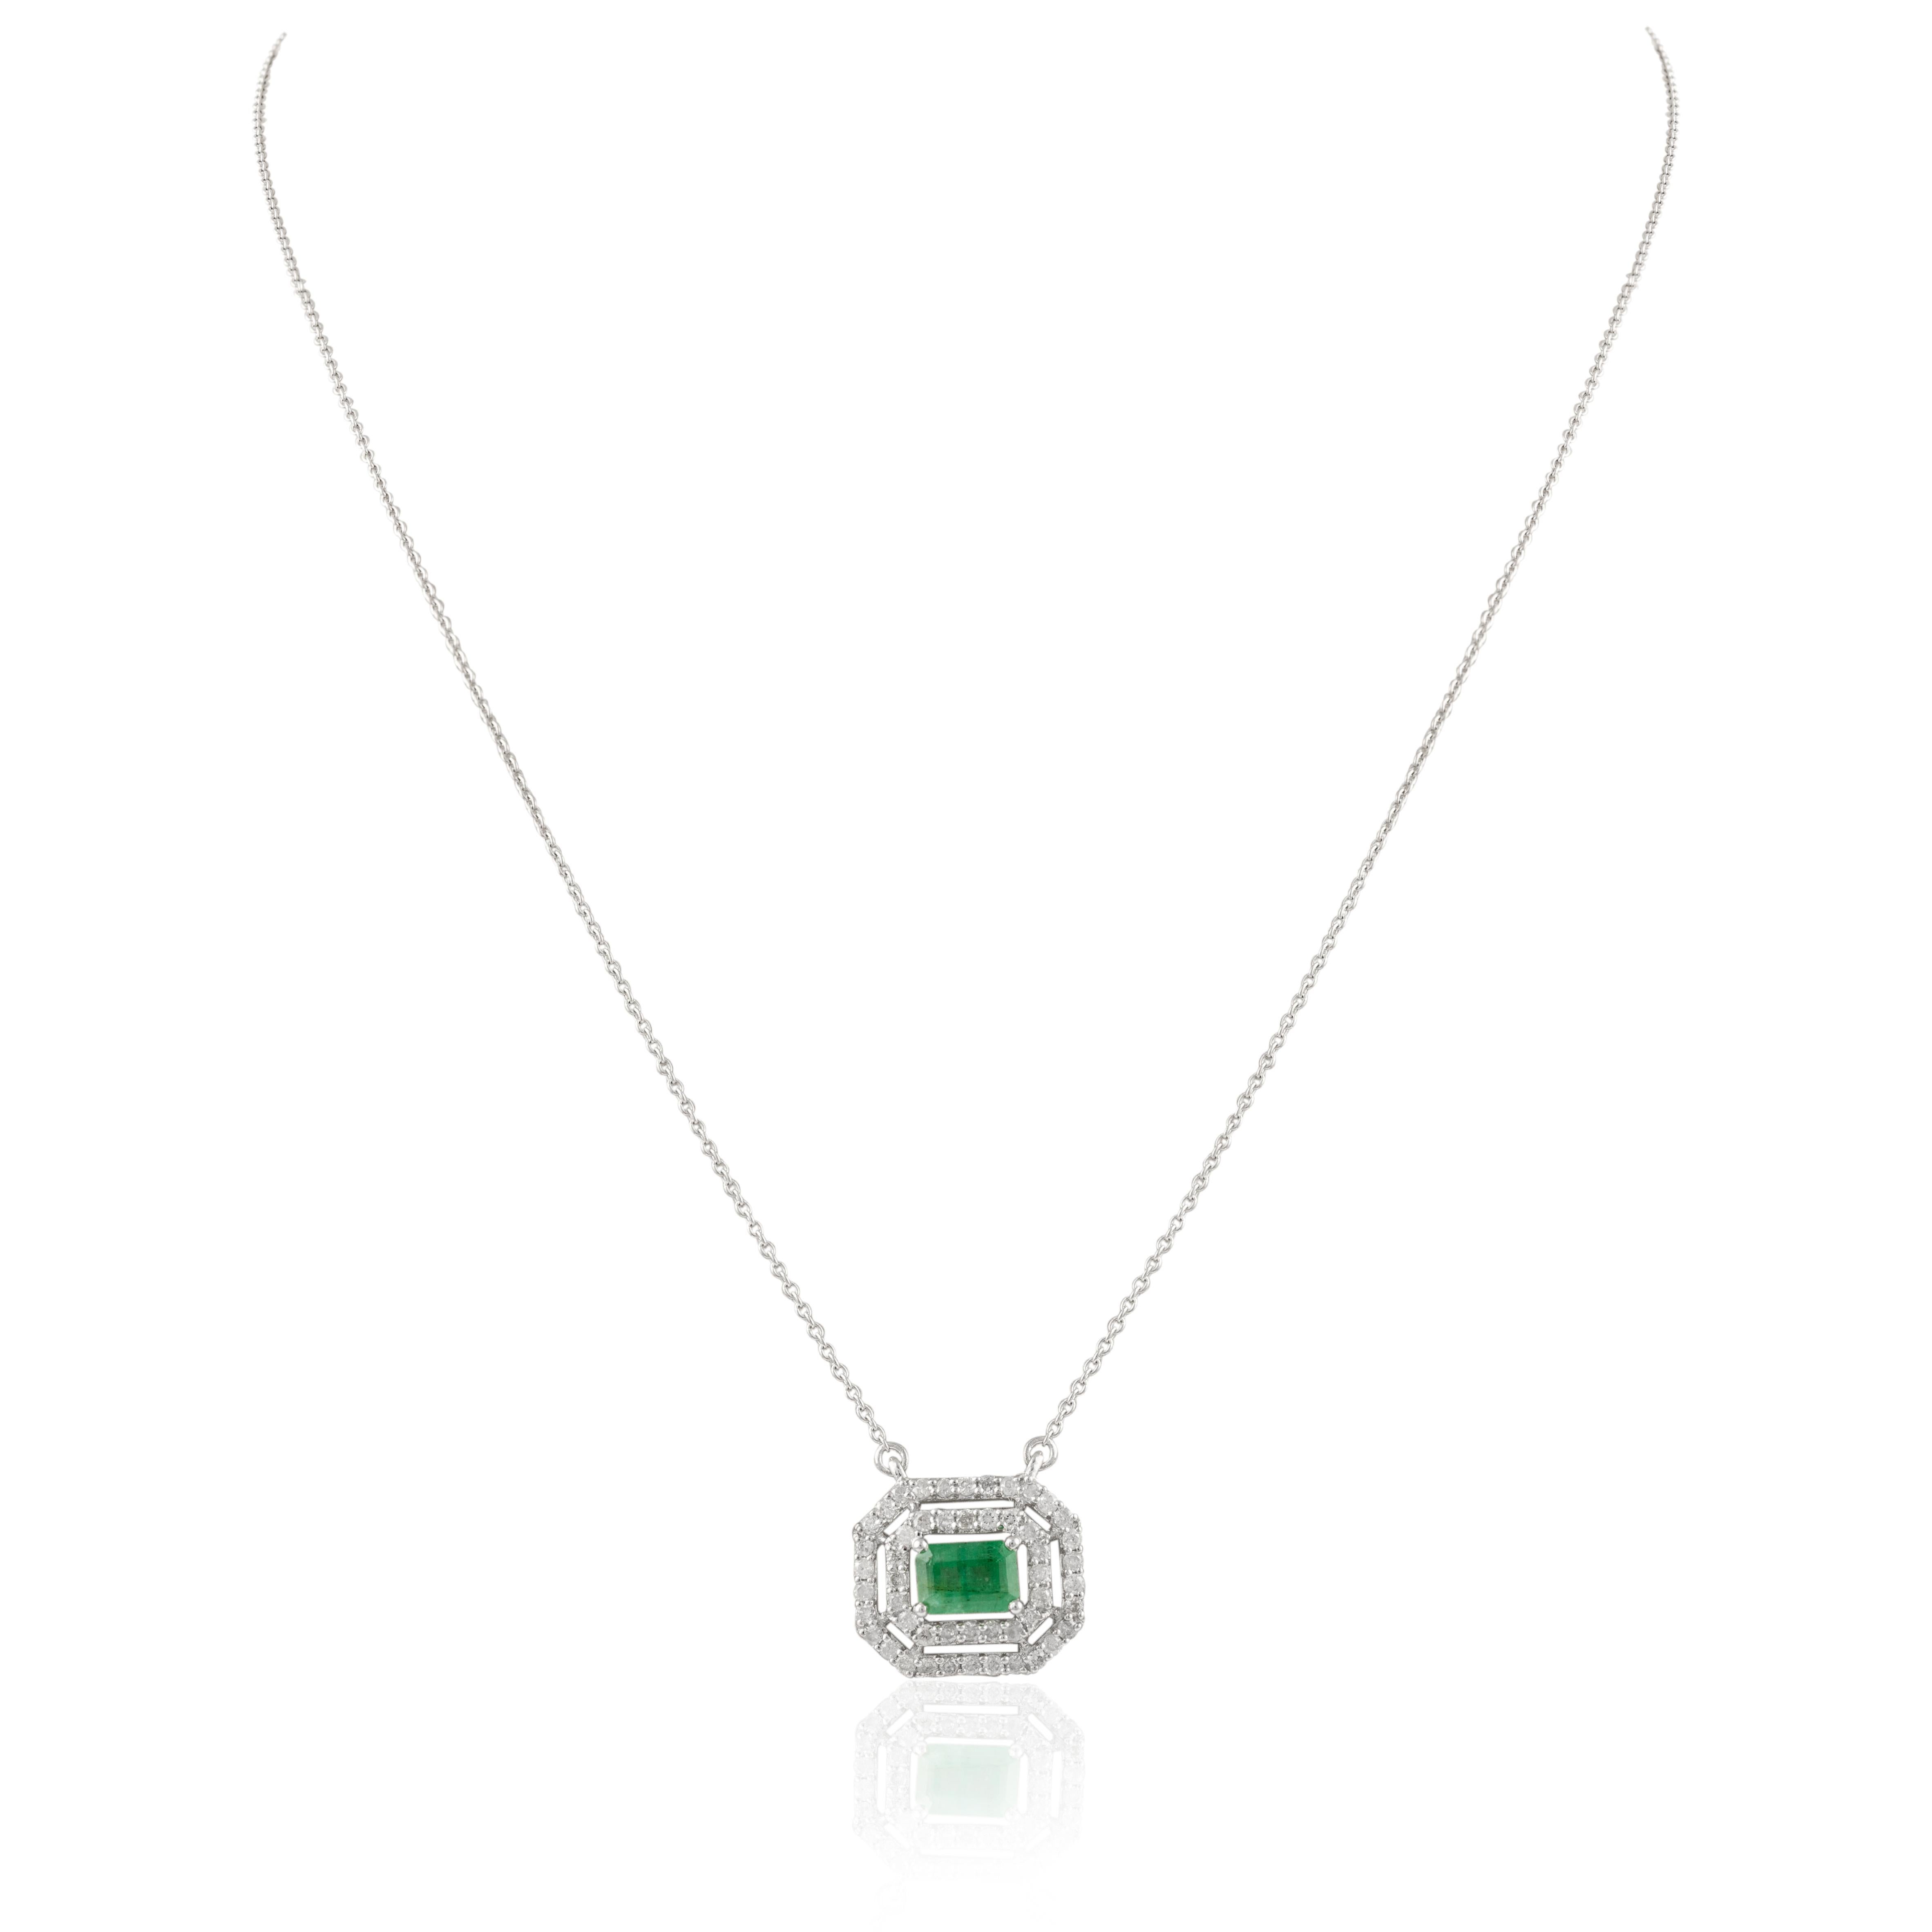 Brilliant Emerald Diamond Pendant Necklace 14k Solid White Gold, Gift For Sister In New Condition For Sale In Houston, TX